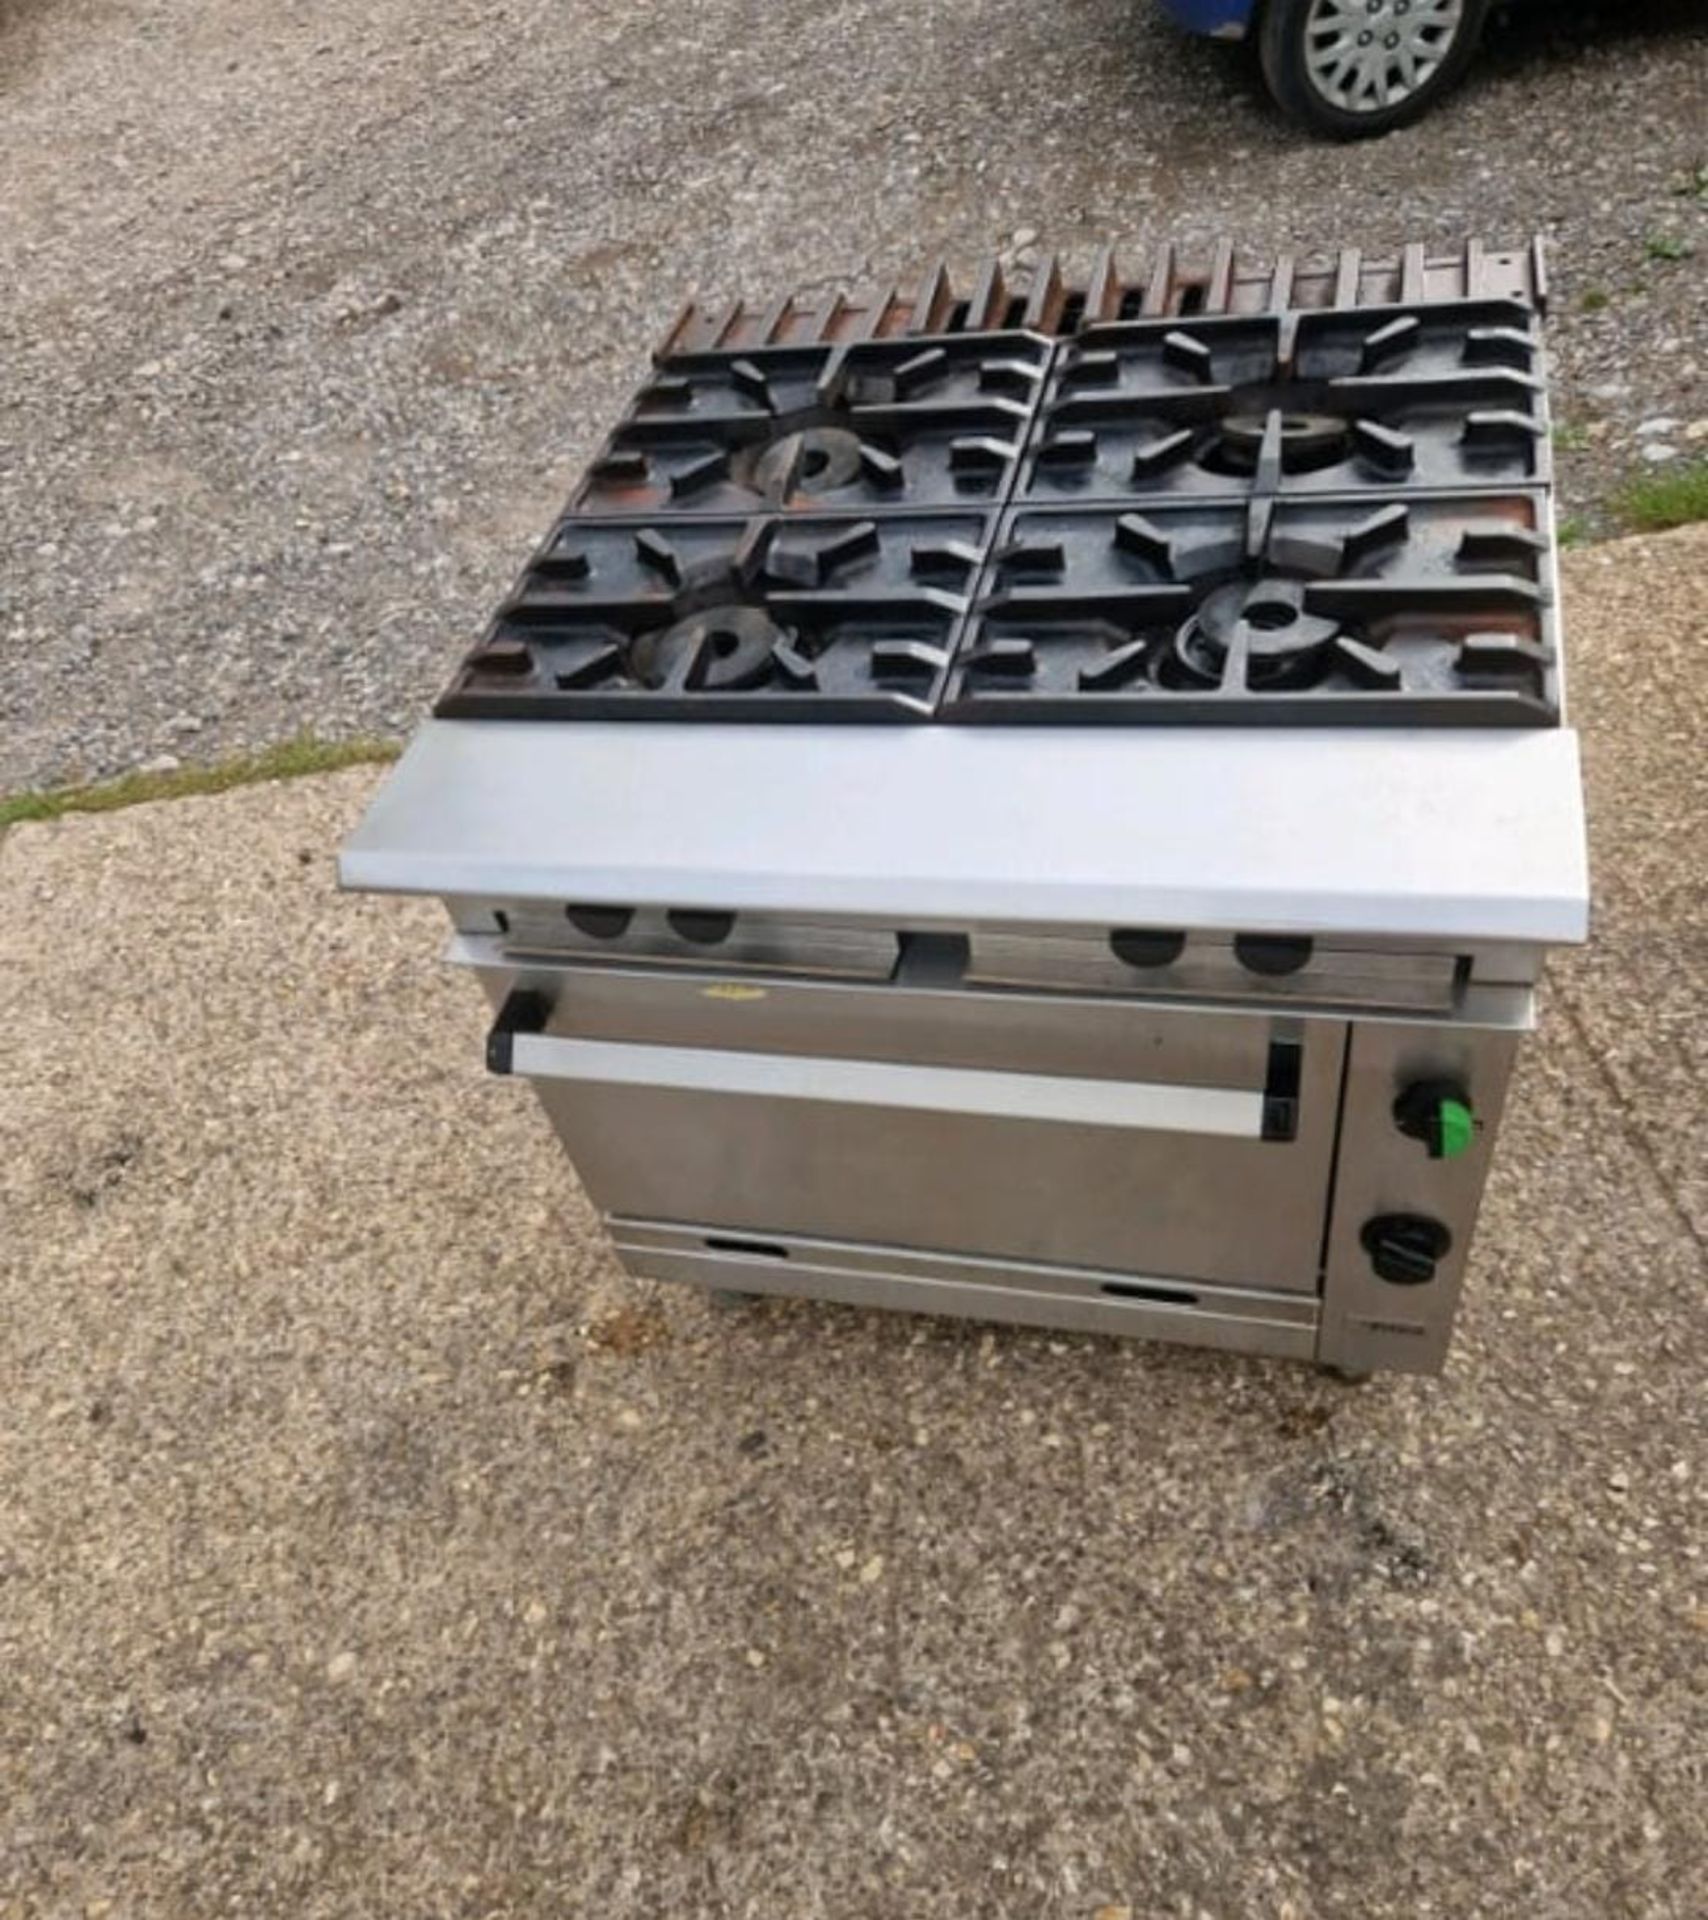 FALCON CHITAIN 4 BURNER COOKER WITH OVEN - Image 2 of 3